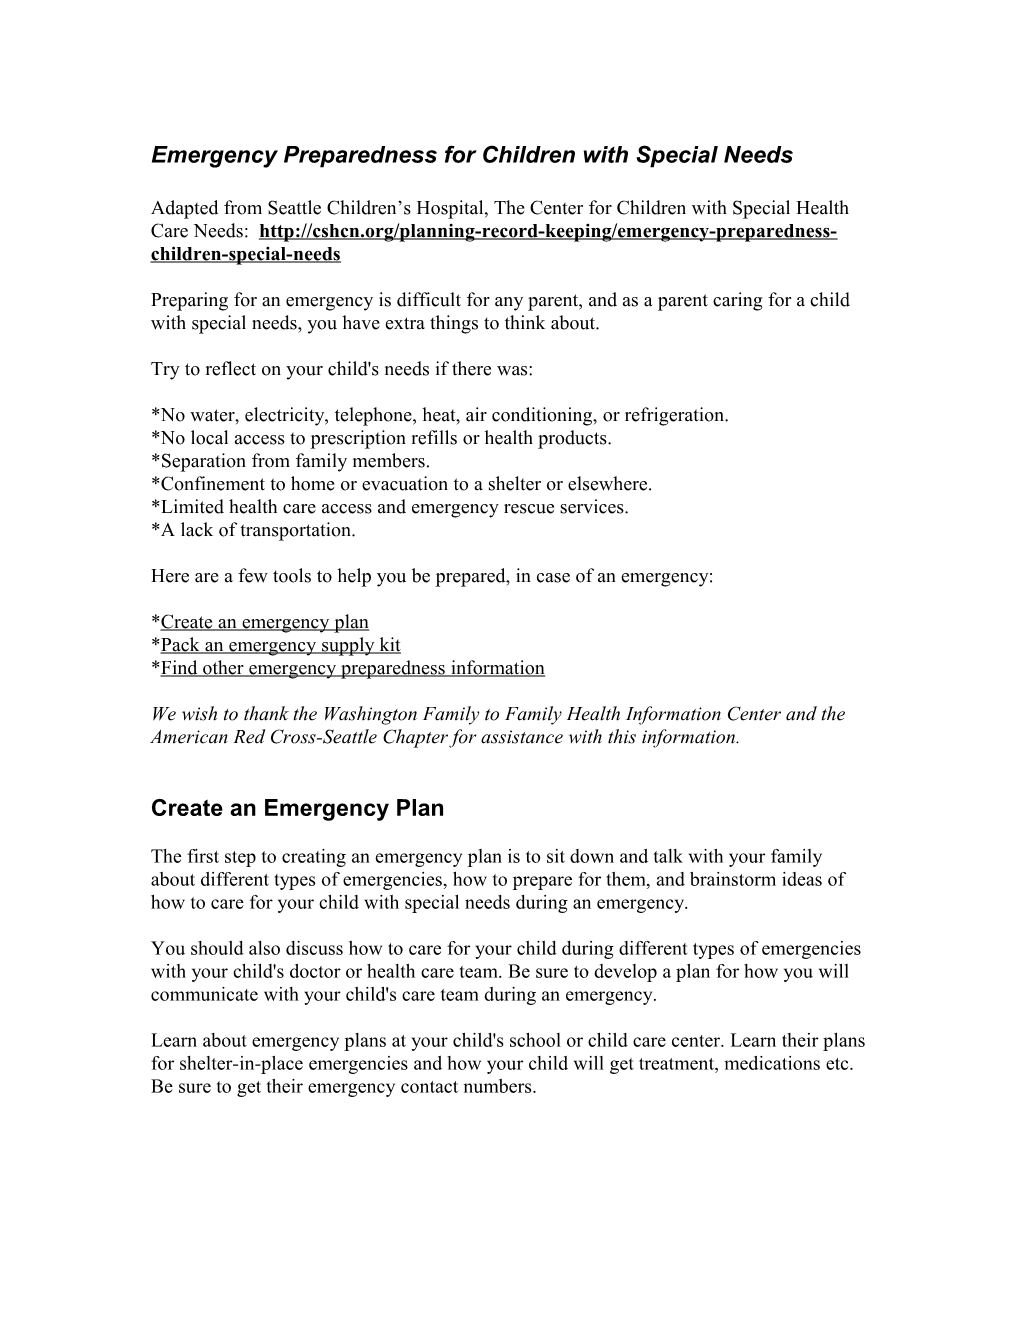 Emergency Preparedness for Children with Special Needs